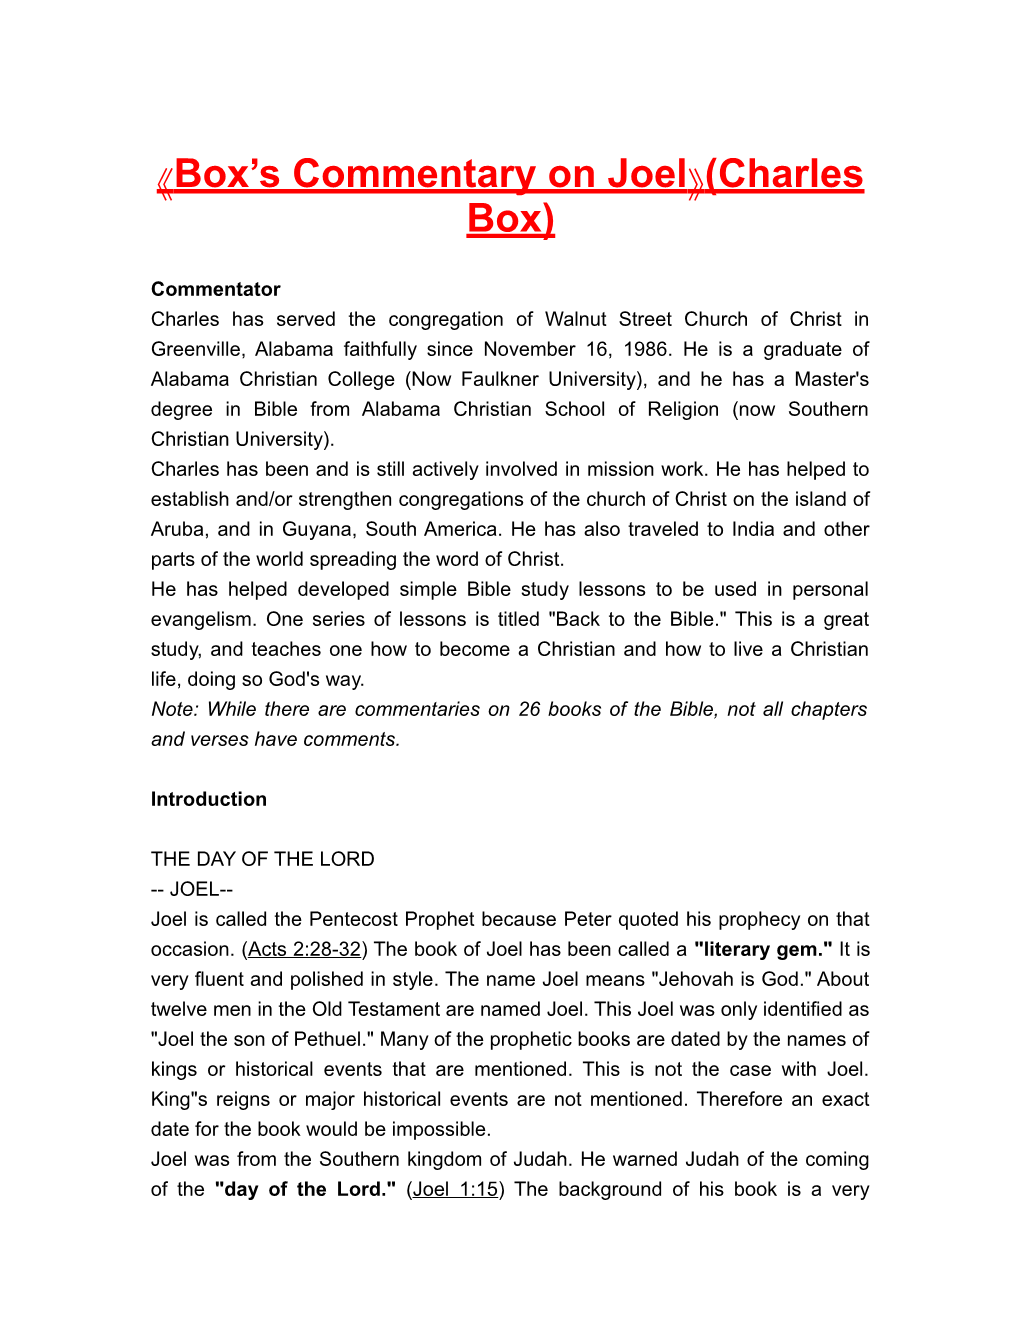 Box S Commentary on Joel (Charles Box)